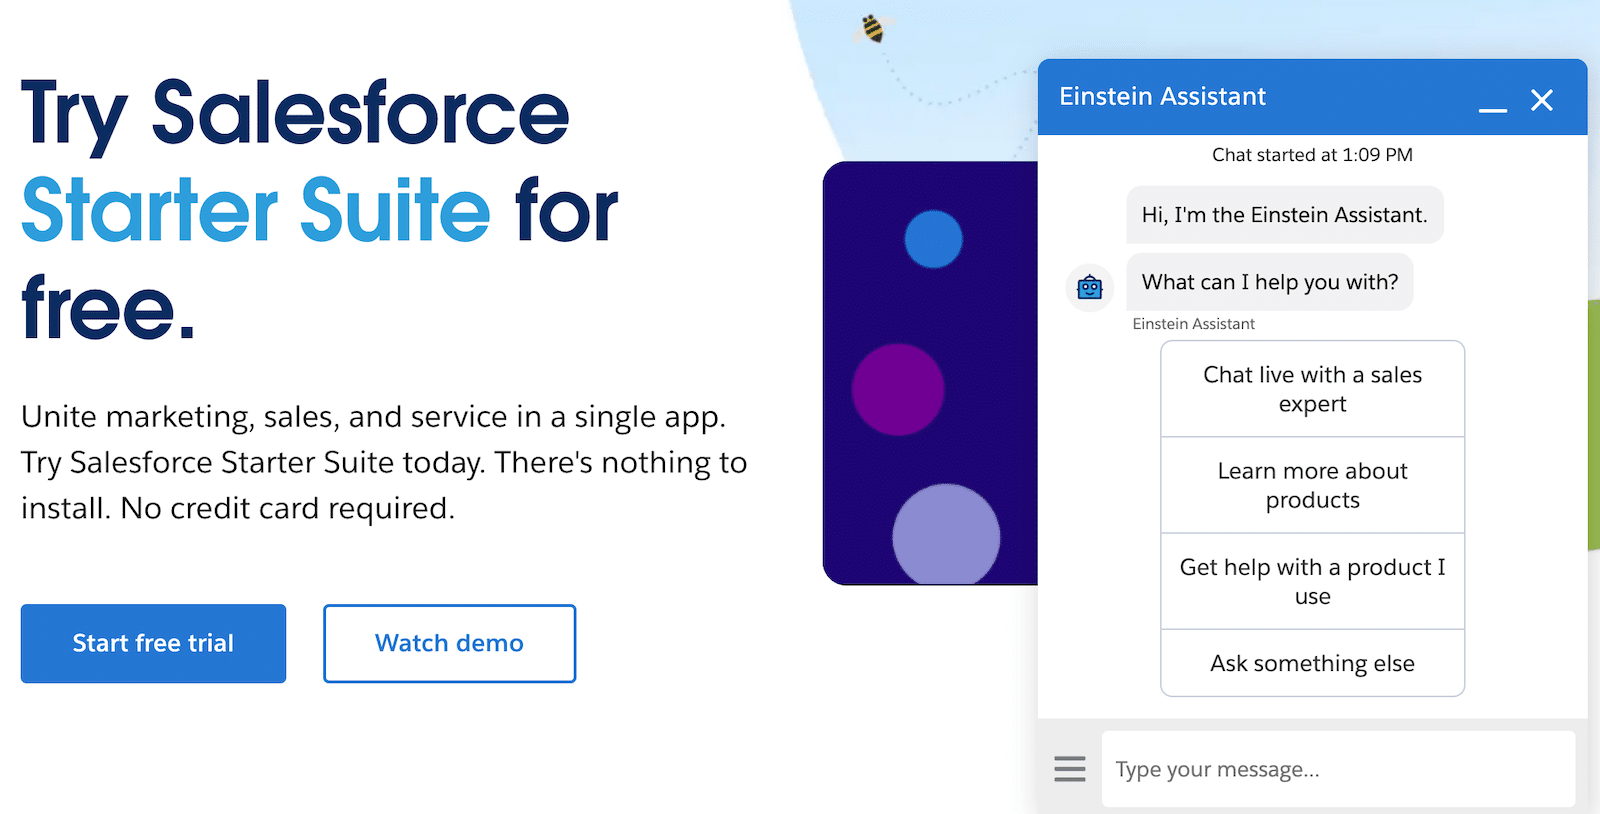 Chat options on the Salesforce website.